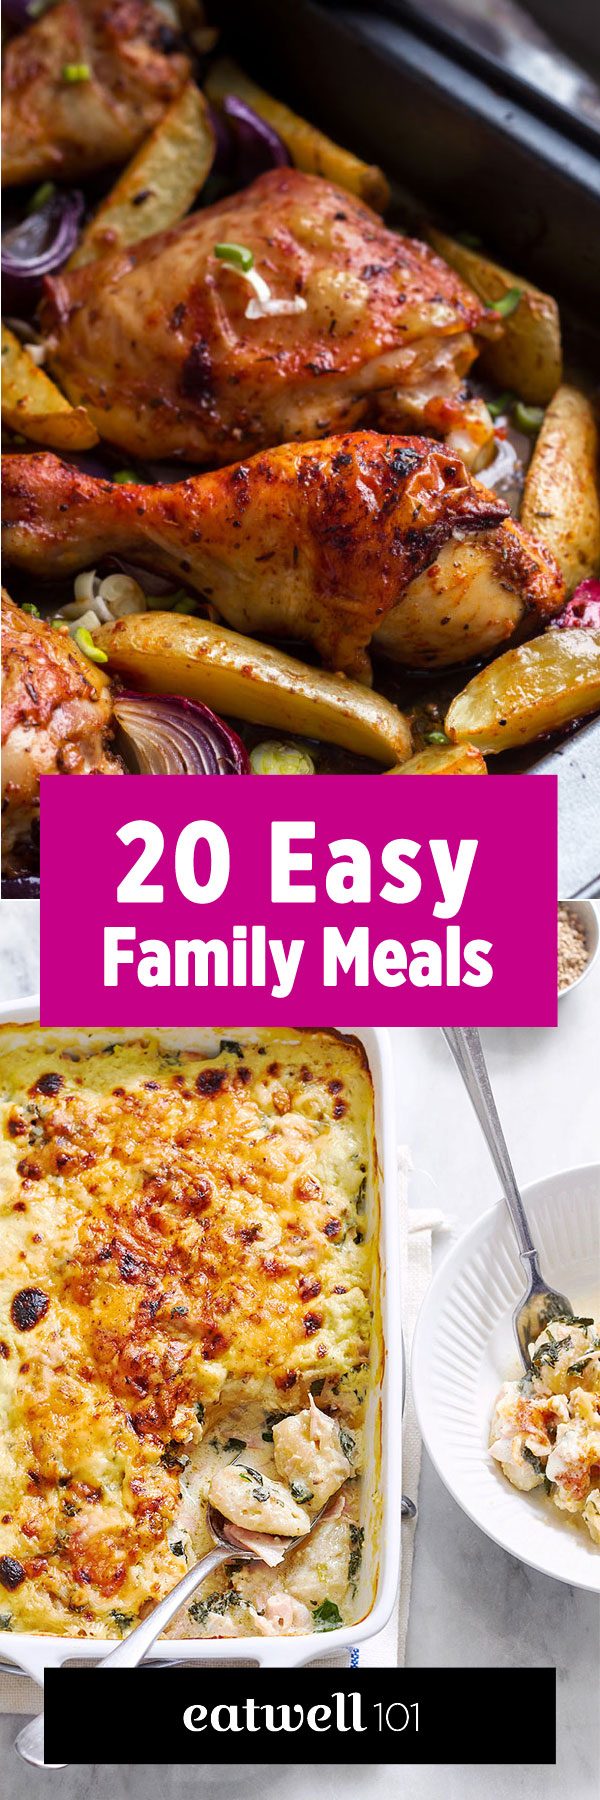 Healthy Meals Recipes: 22 Healthy Meals for Family Dinner ...